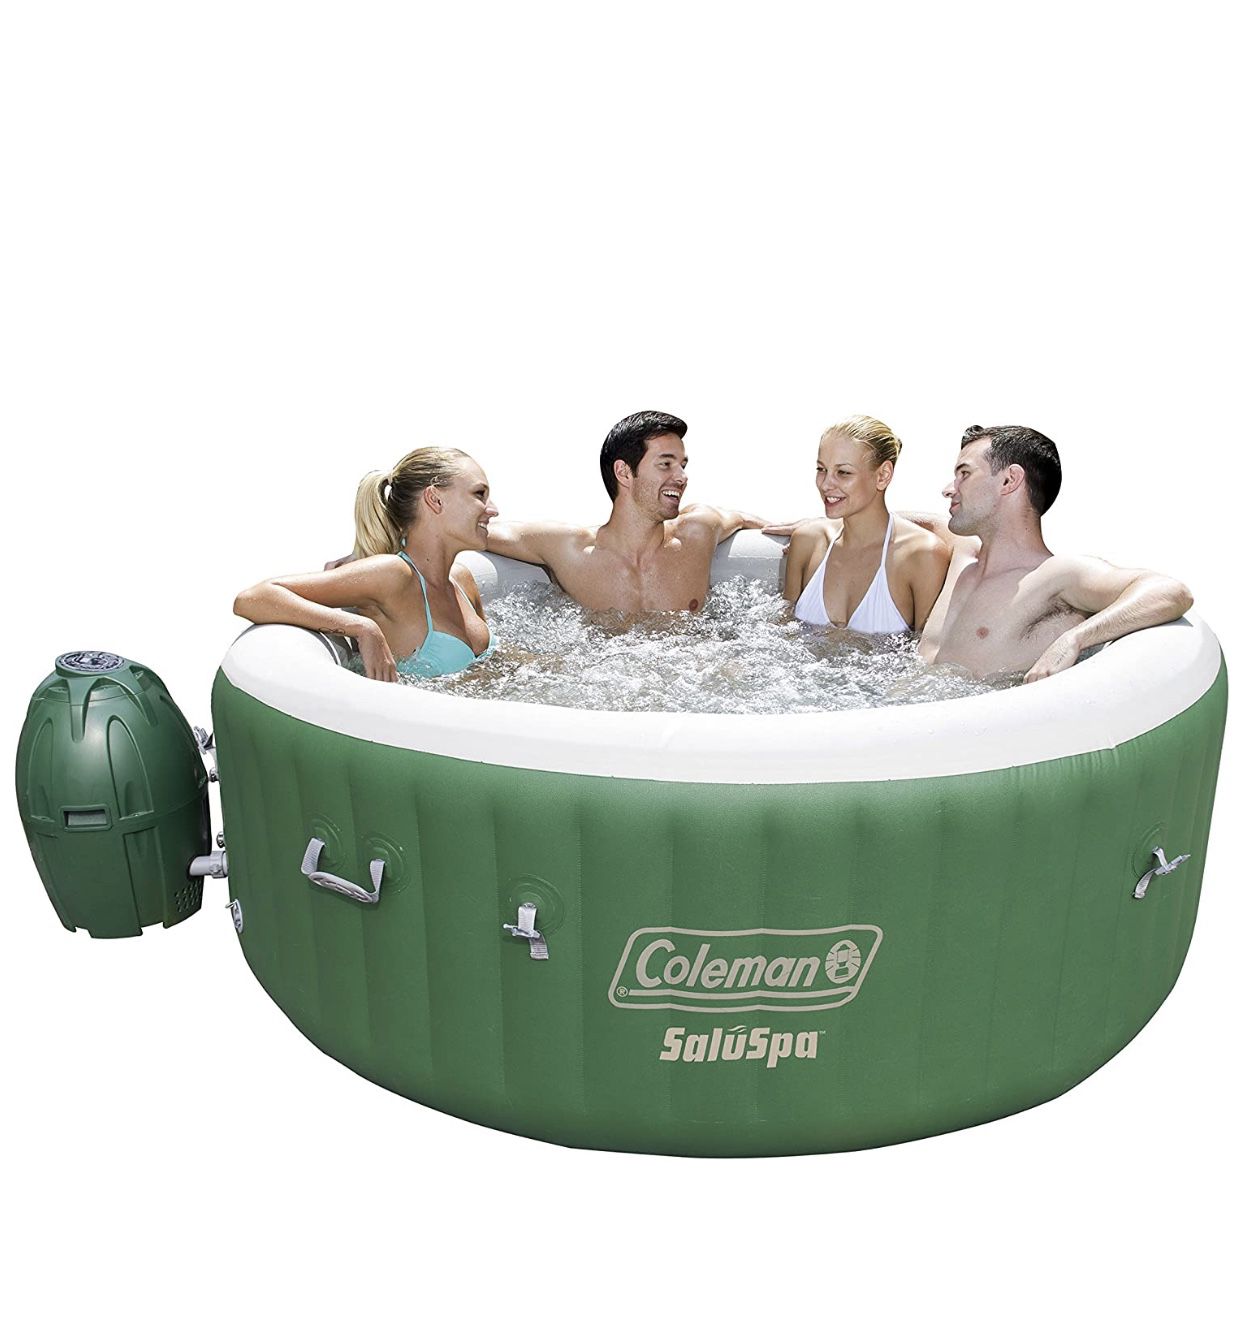 Coleman SaluSpa Inflatable Hot Tub Spa, Green & White new in box.